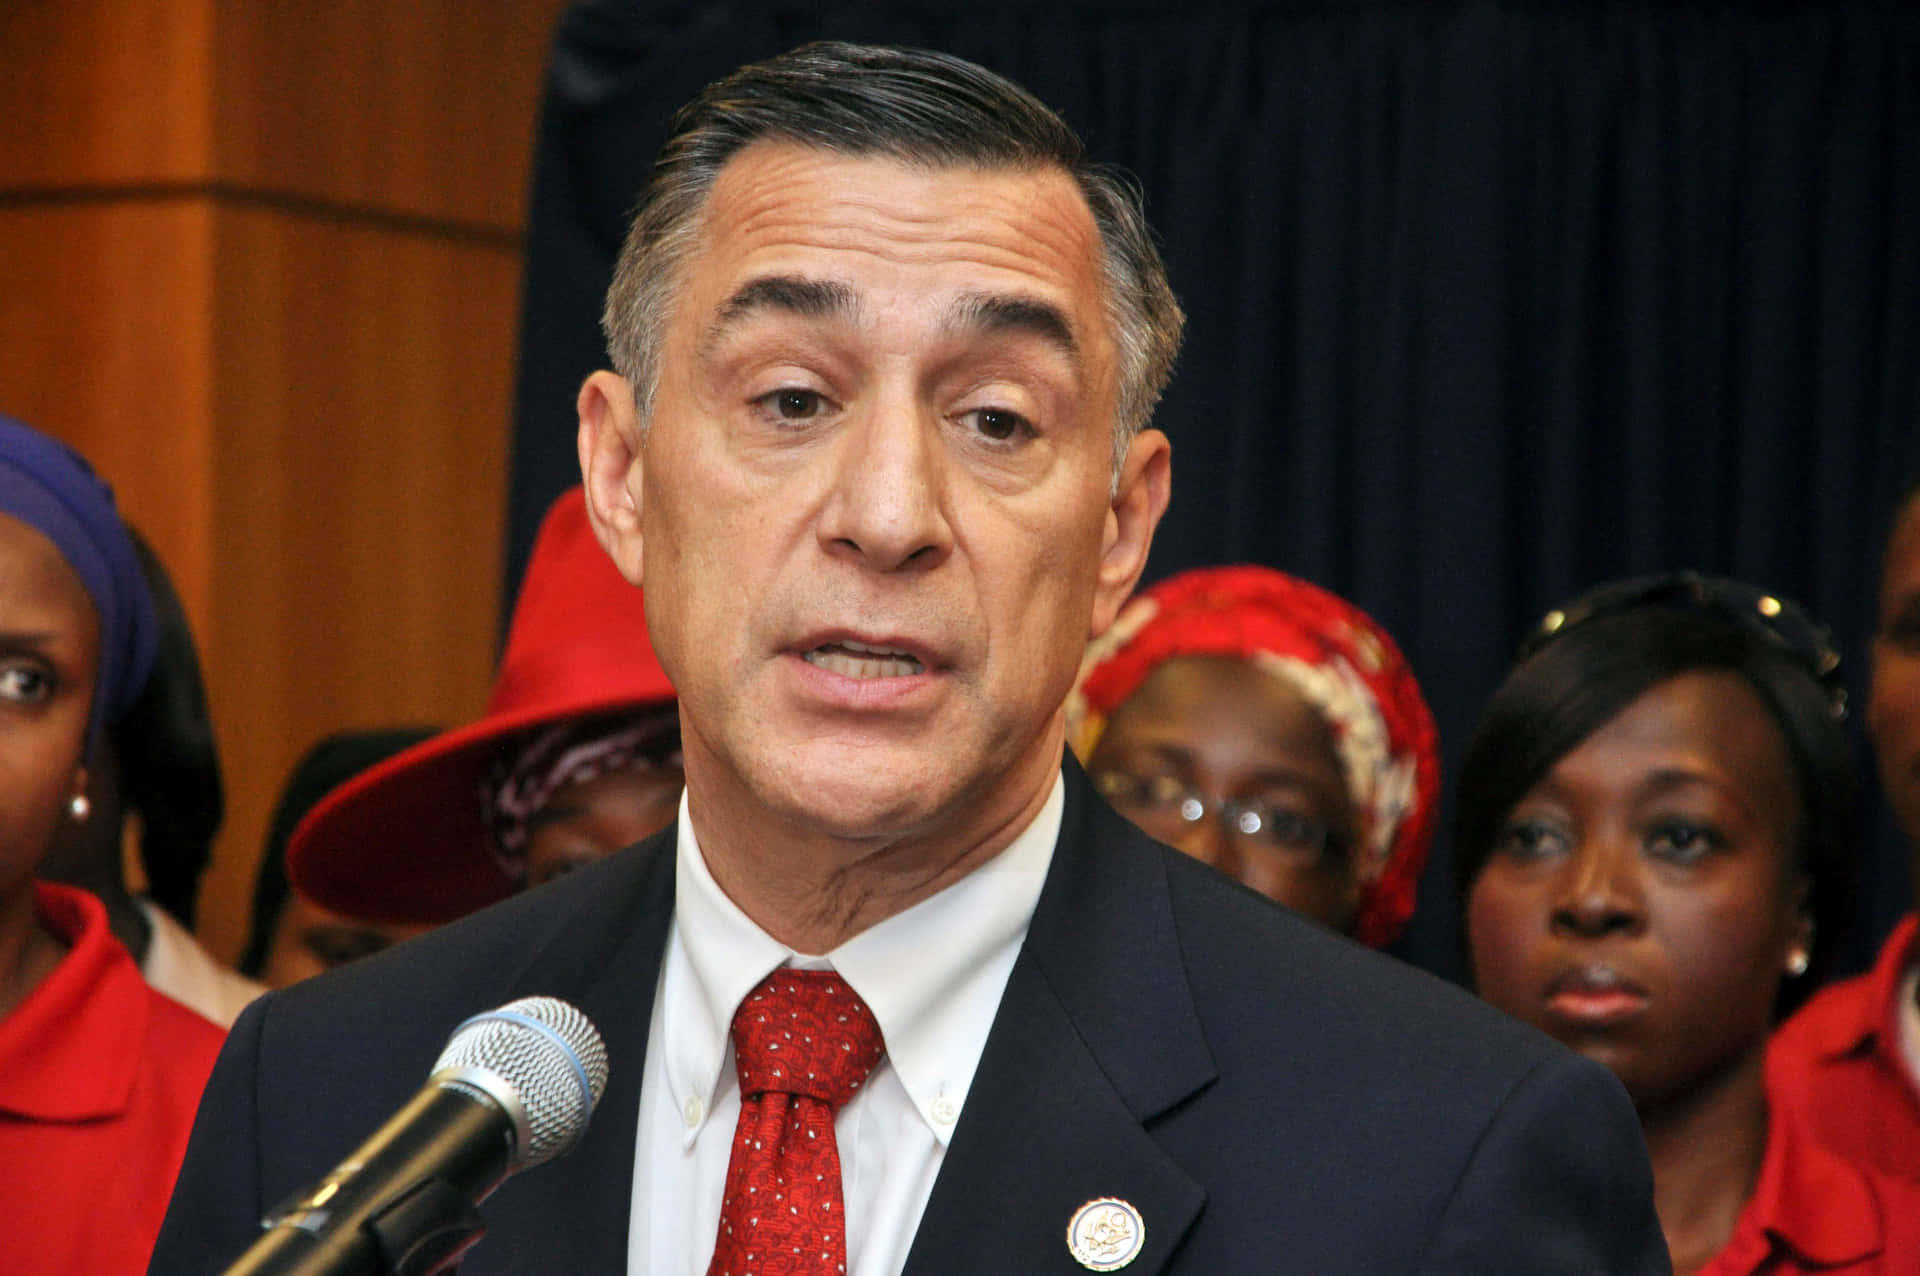 Darrell Issa With Women In Background Wallpaper